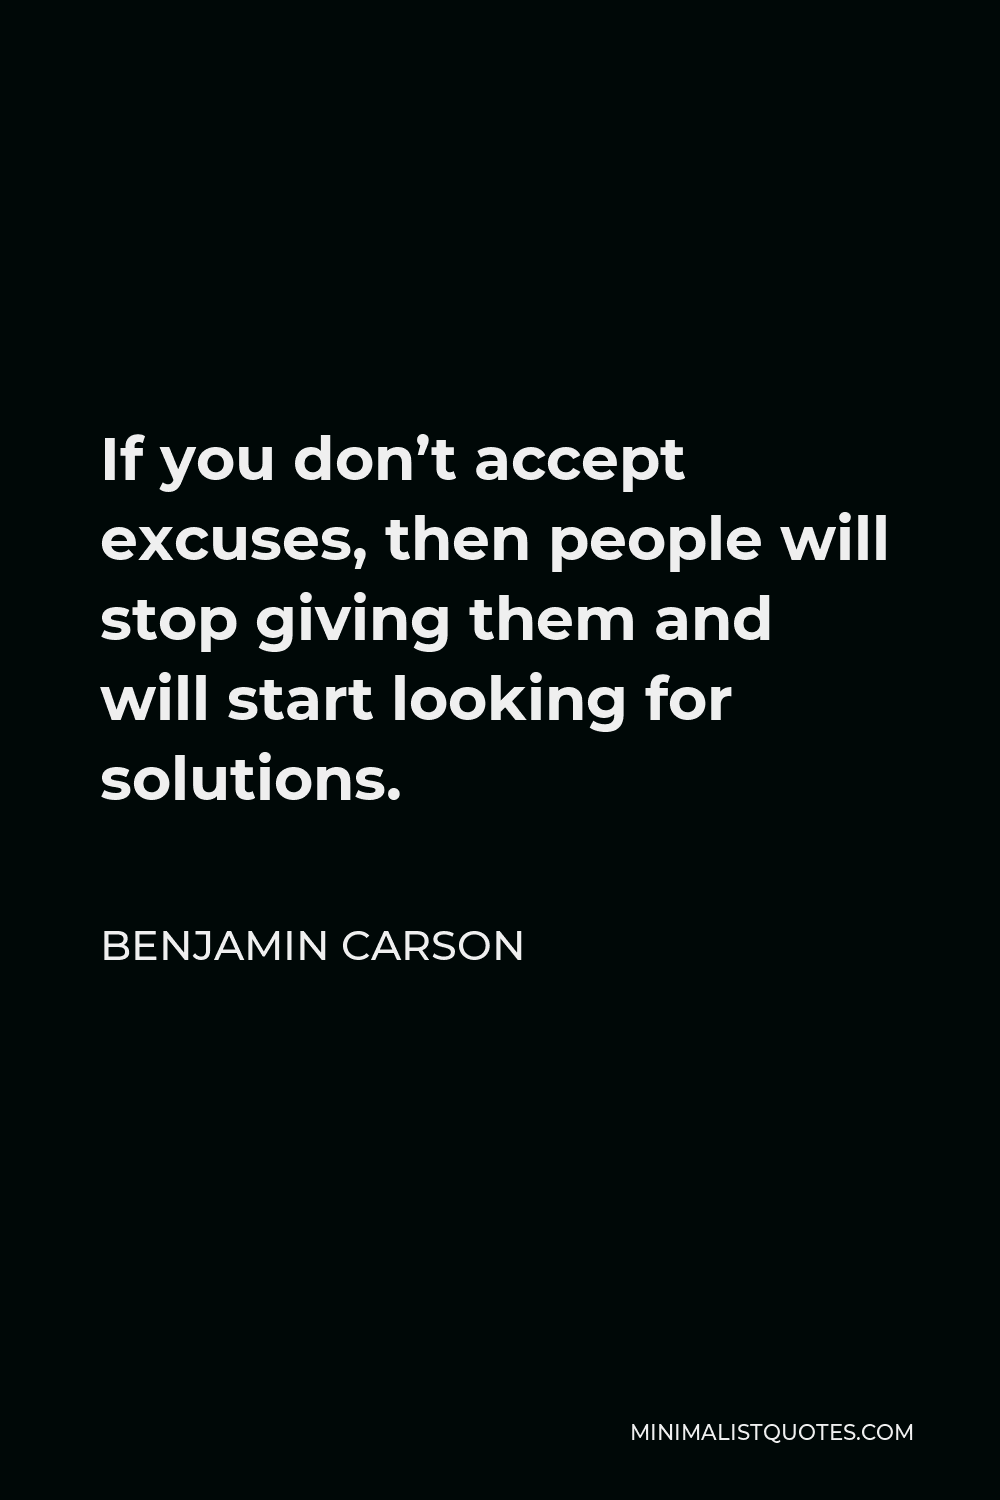 Benjamin Carson Quote - If you don’t accept excuses, then people will stop giving them and will start looking for solutions.